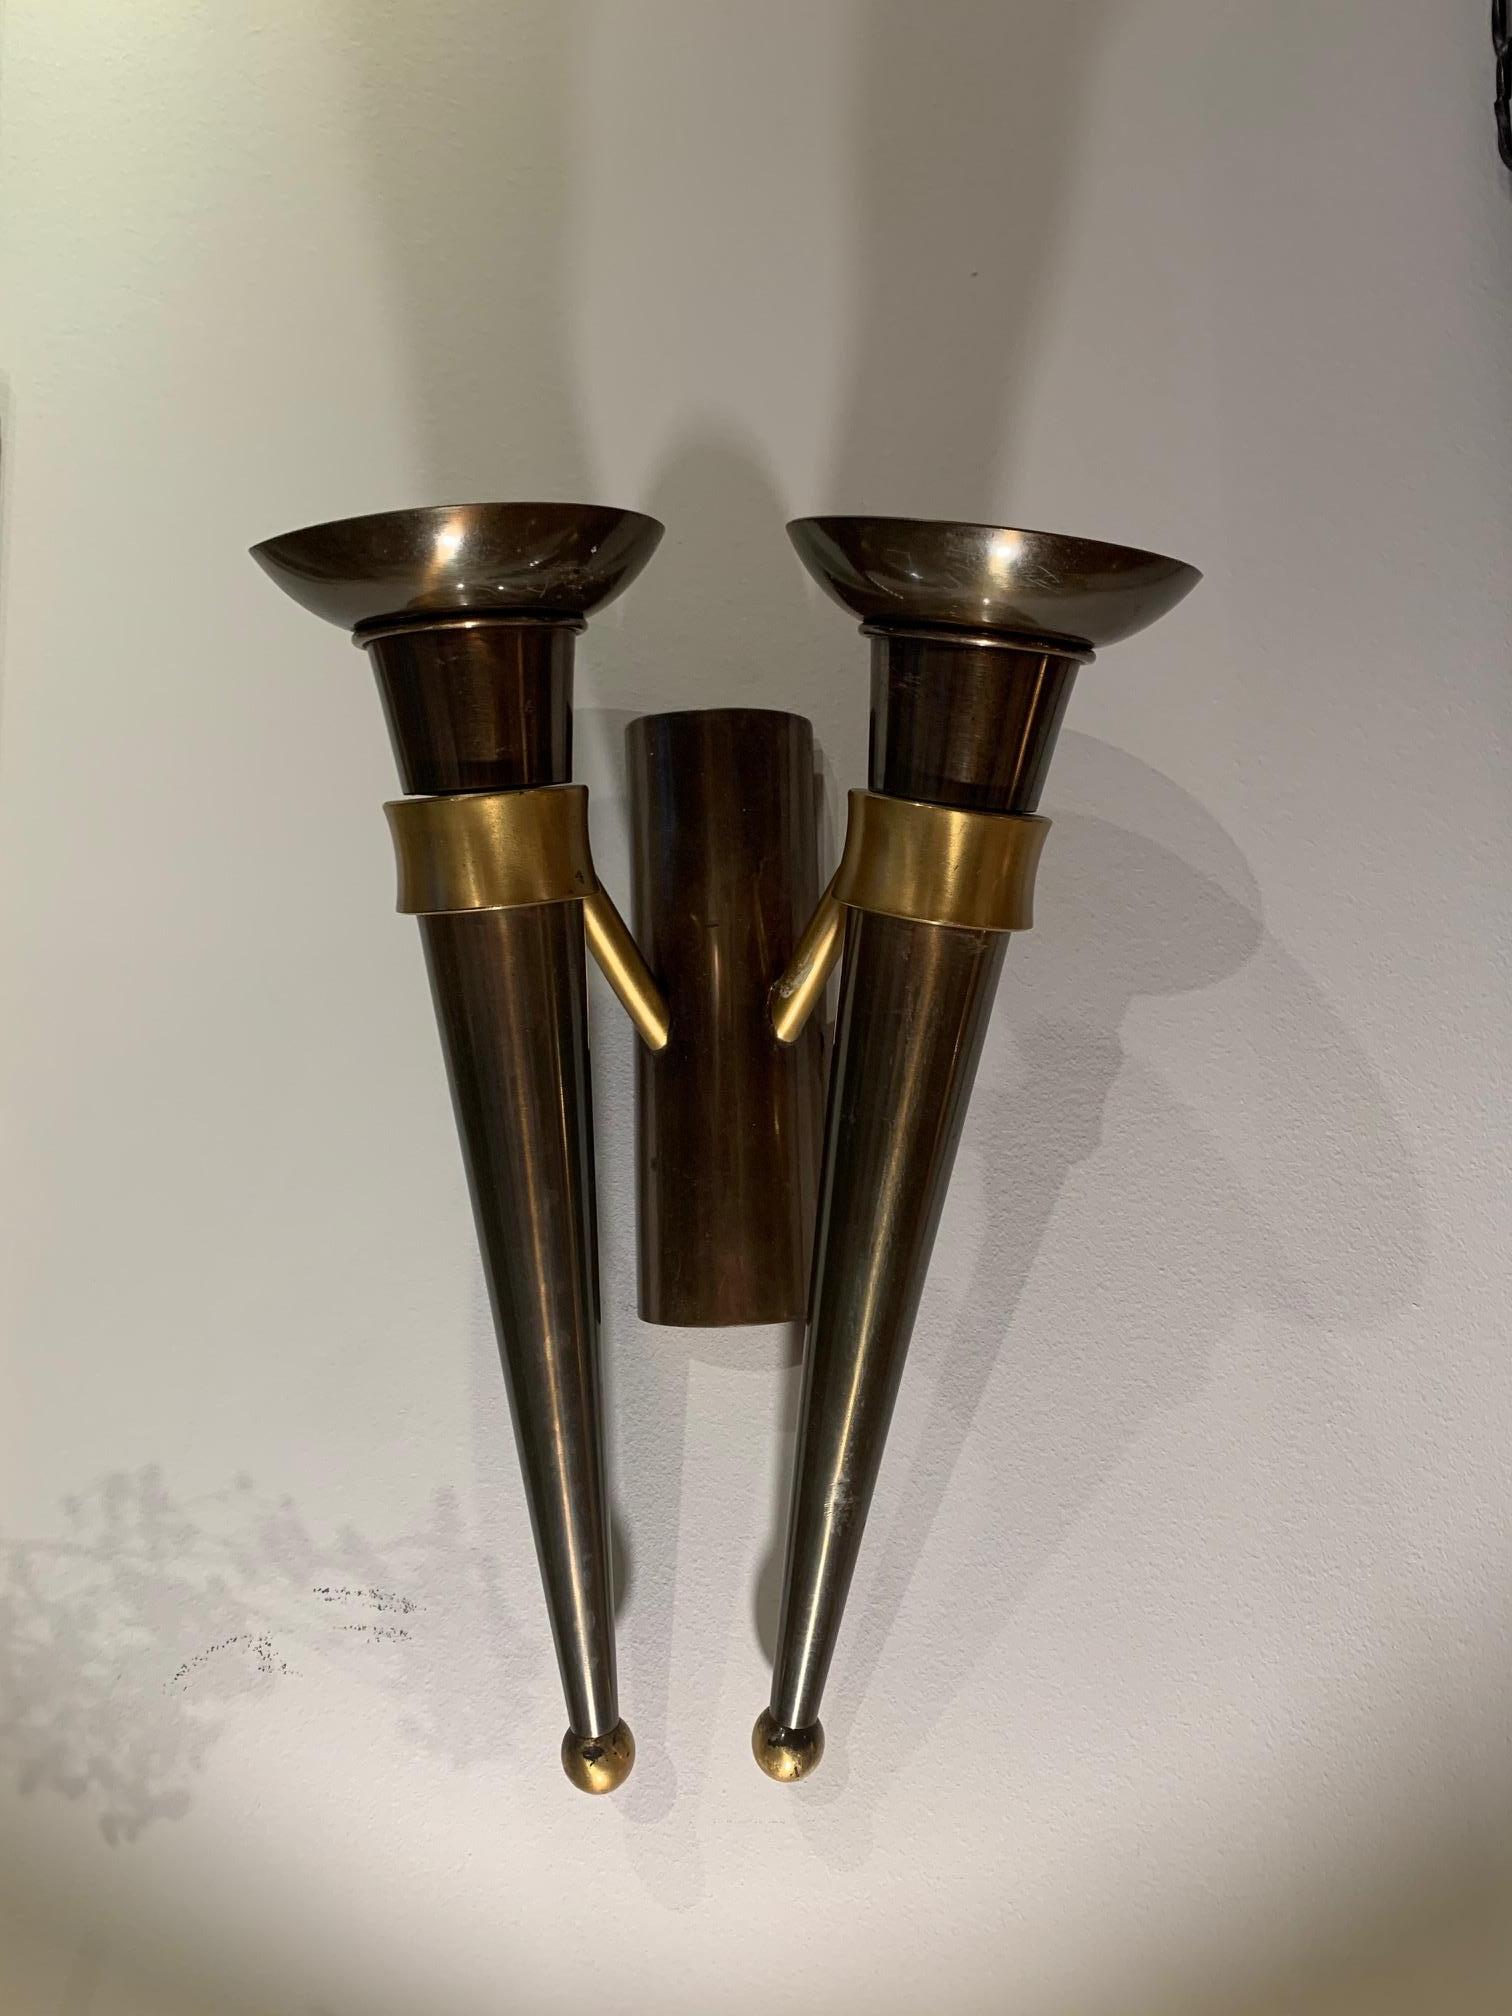 Pair of wall torches in the form of a double torch, in patinated and enameled bronze, two pairs are available, an electrical installation renewed.